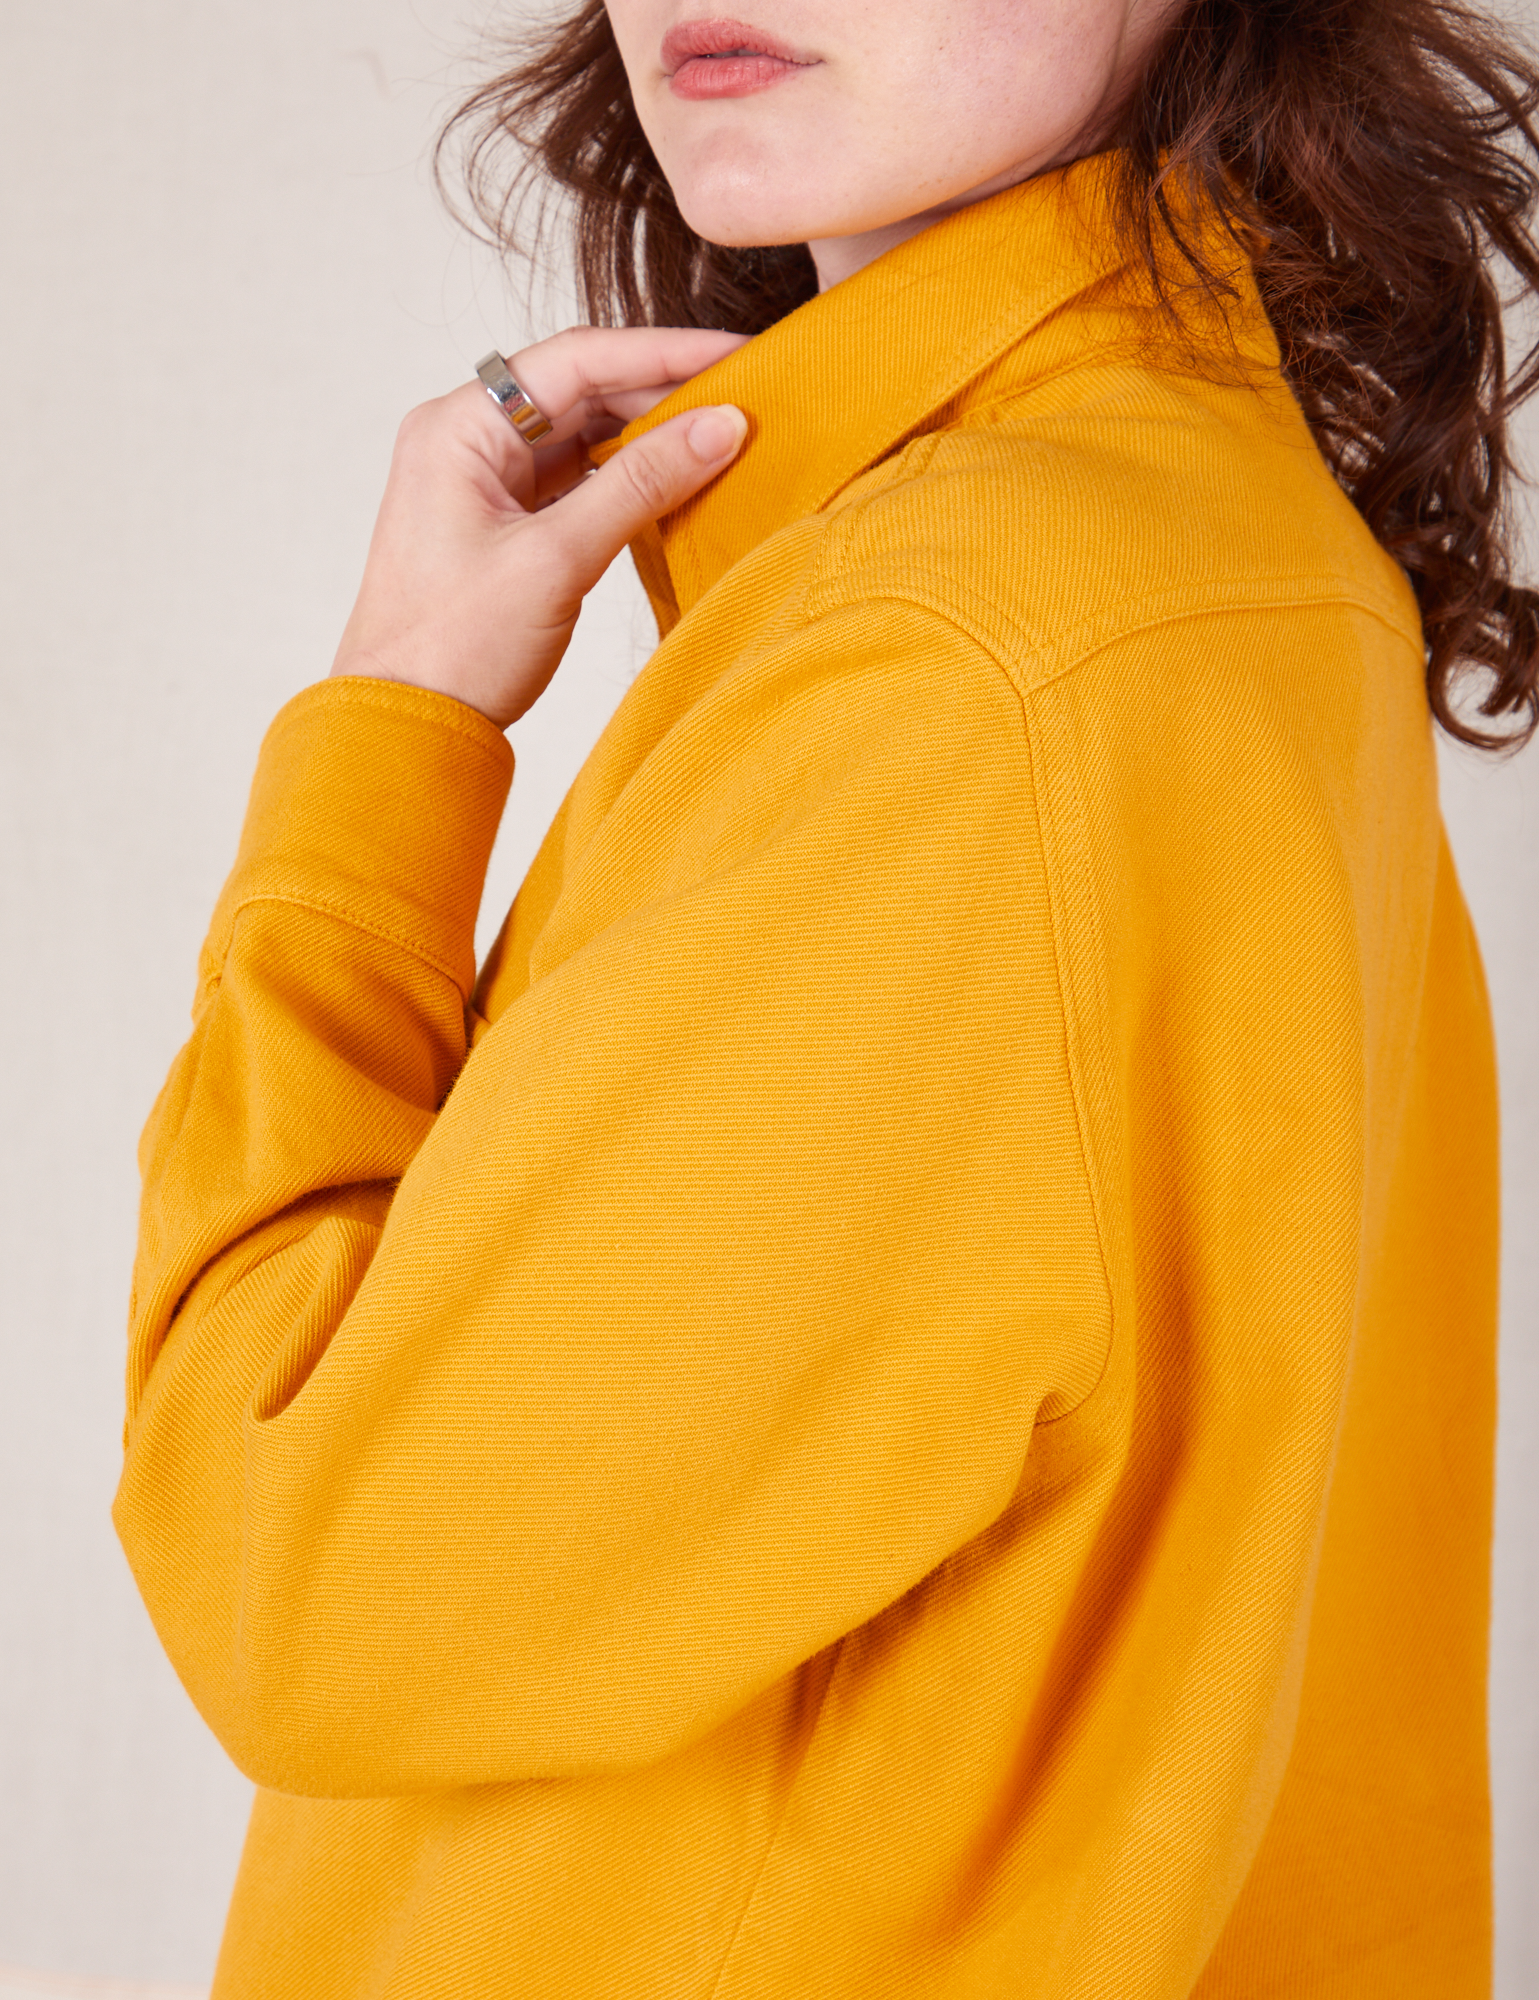 Shoulder side view close up of Flannel Overshirt in Mustard Yellow on Alex